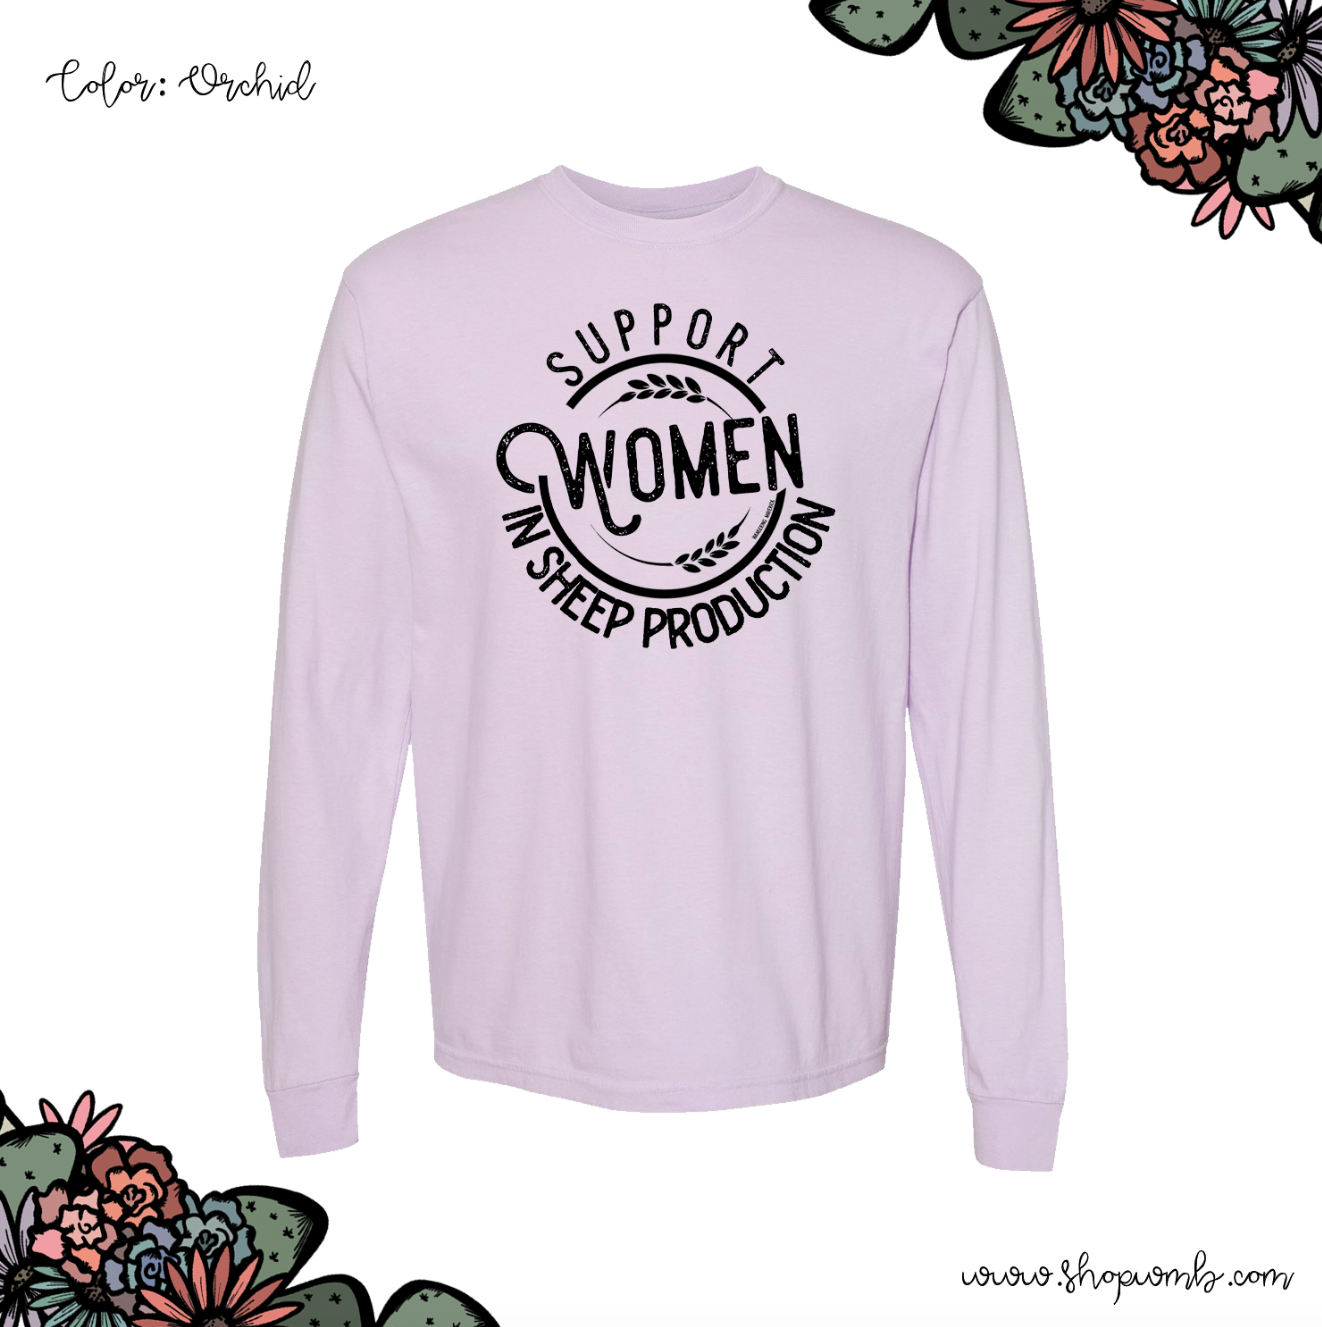 Support Women In Sheep Production LONG SLEEVE T-Shirt (S-3XL) - Multiple Colors!